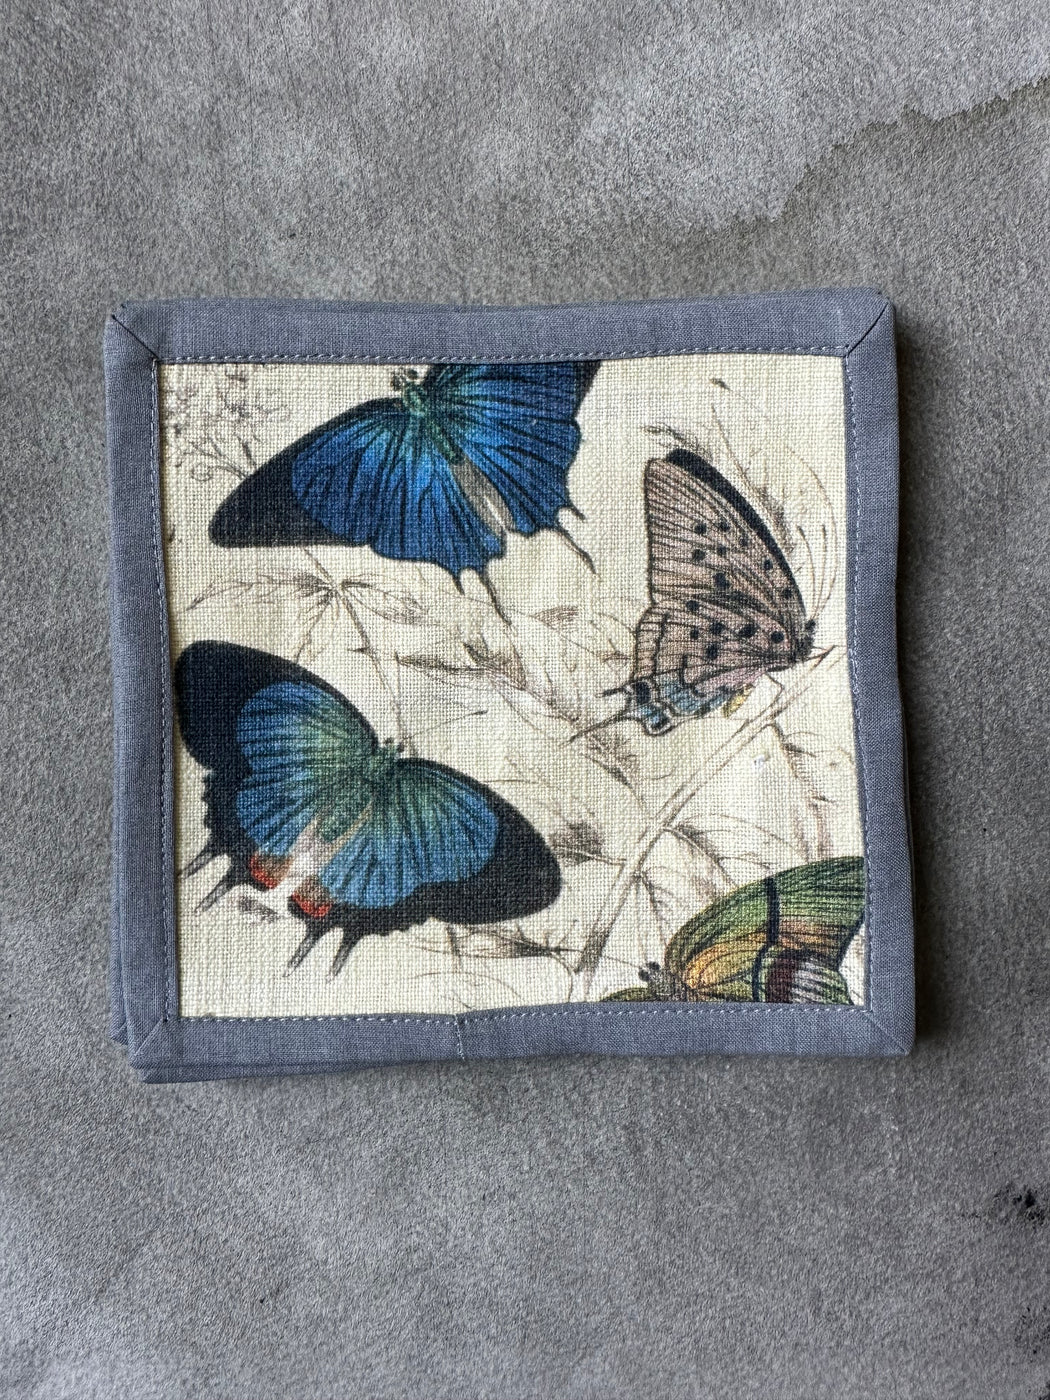 "Butterfly"" Cocktail Napkins by Siren Song